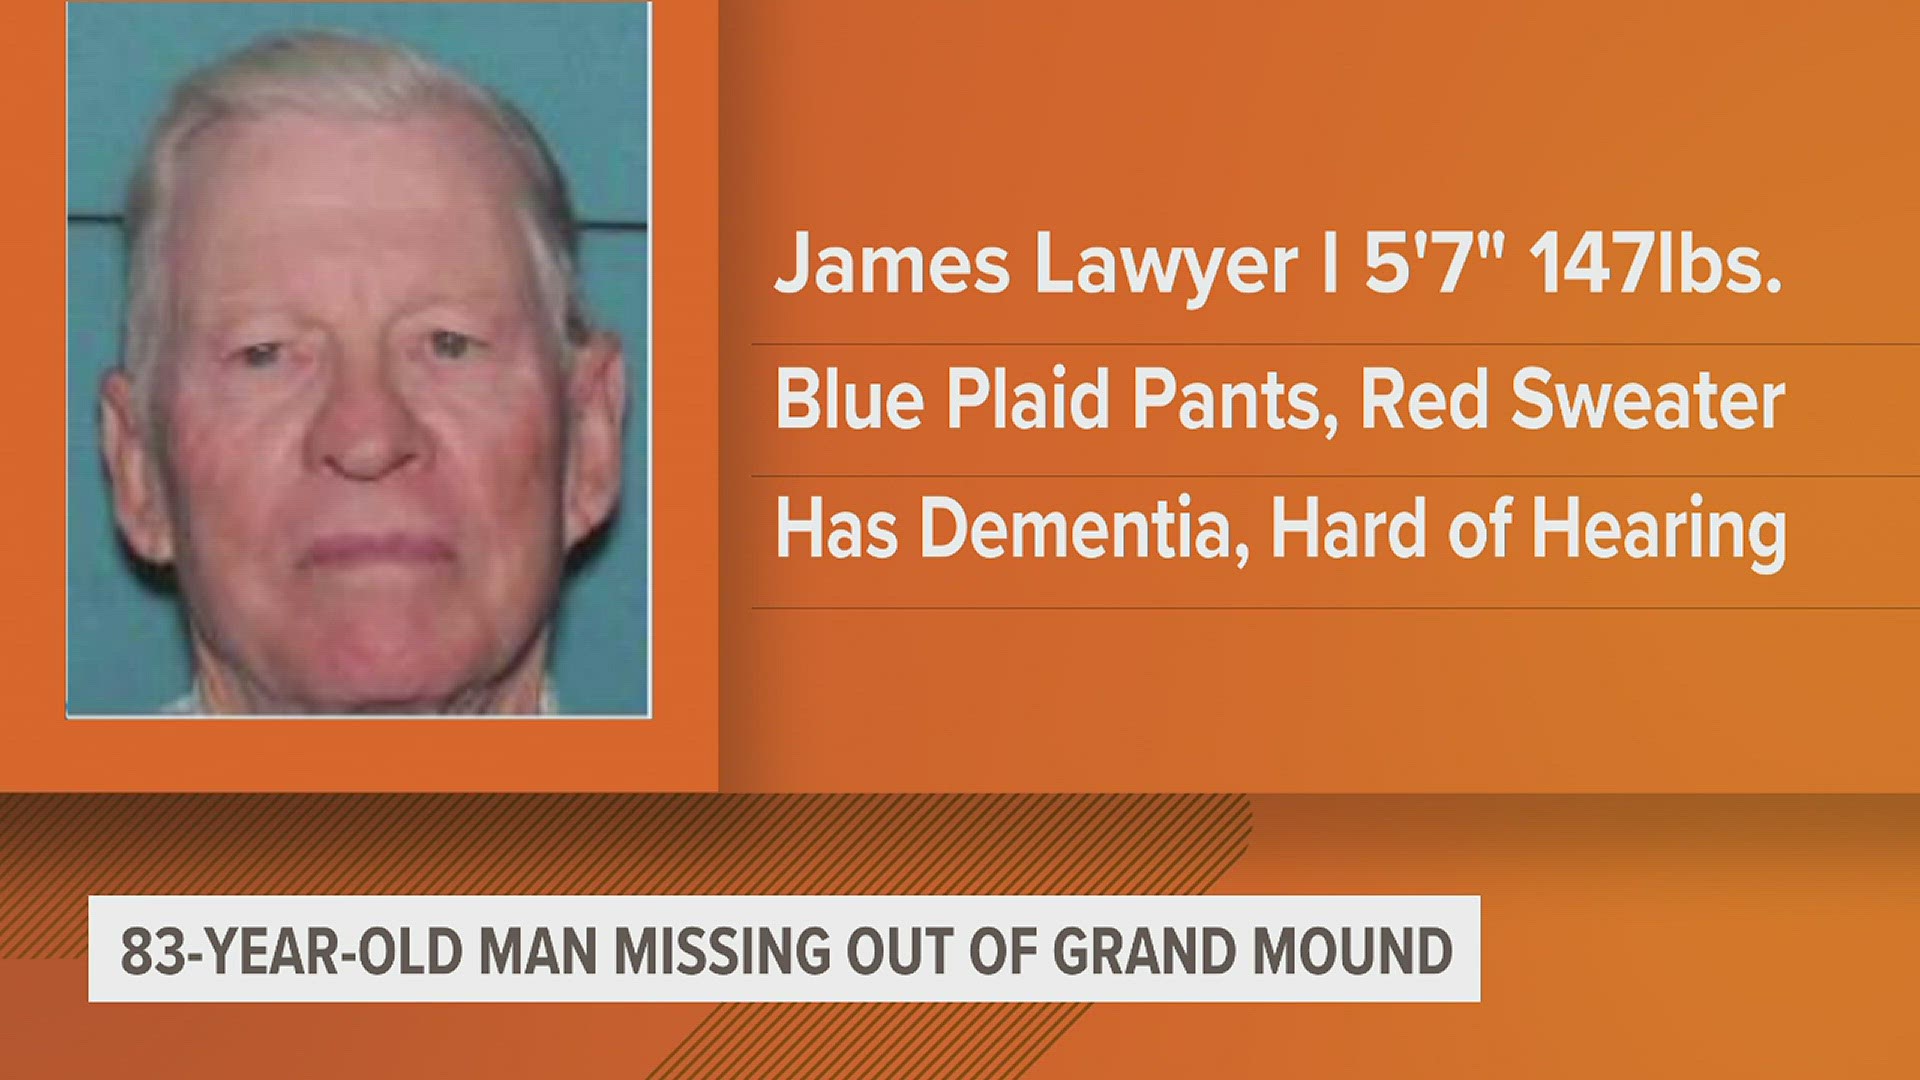 83-year-old James Lawyer is a missing man from Grand Mound, and was seen in Clinton County. He is hard of hearing and has dementia.